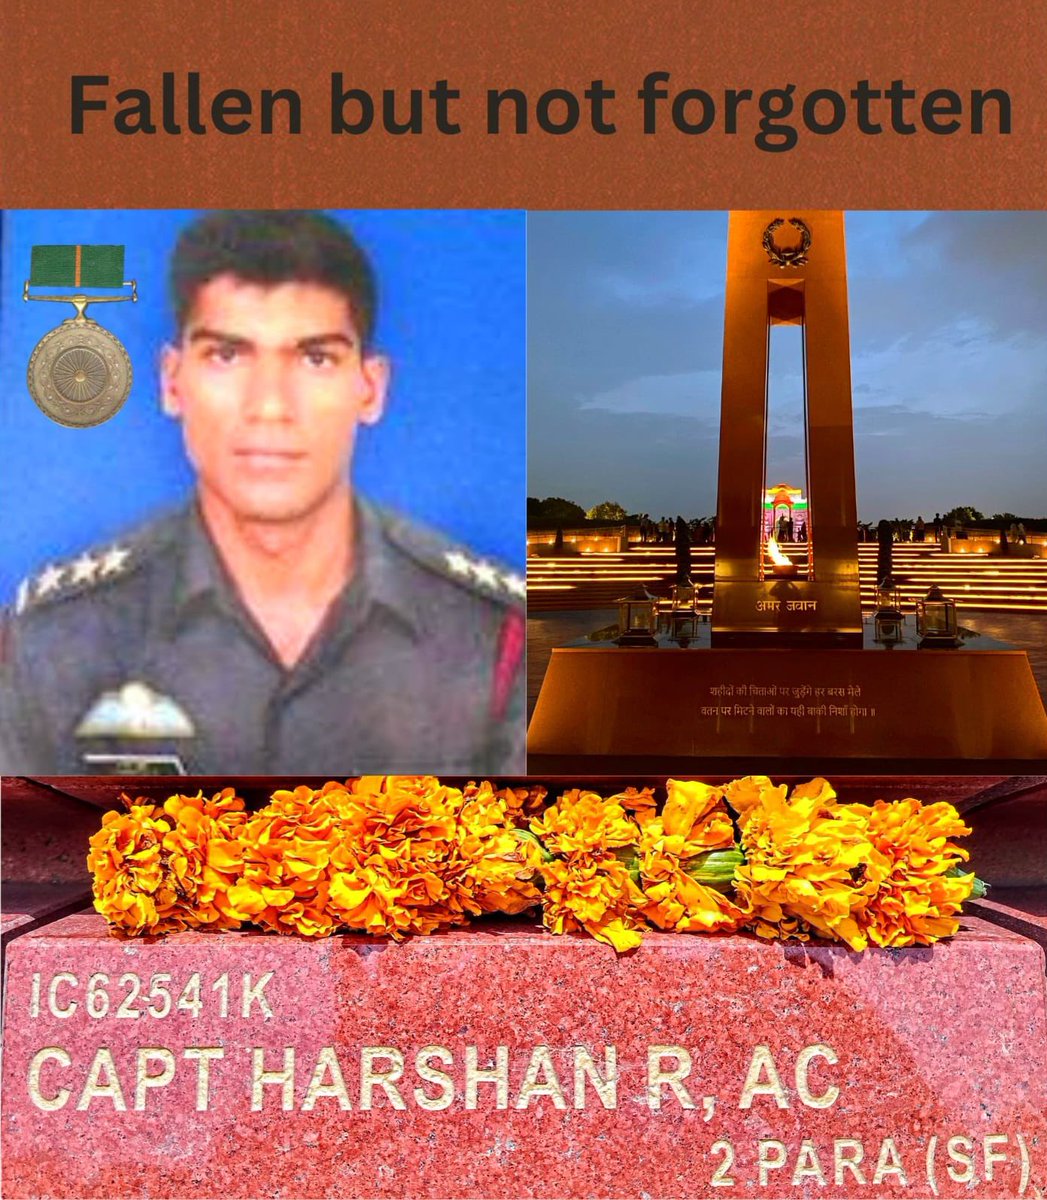 Men are mortals but the braves who die for their #Nation become immortals. #Onthisday Capt Harshan R led an operation killing two hardcore militants in #Lolab before sacrificing his life. His gallant act earned him #AshokChakra (P). Homage to the #Warrior on his Balidaan Diwas.